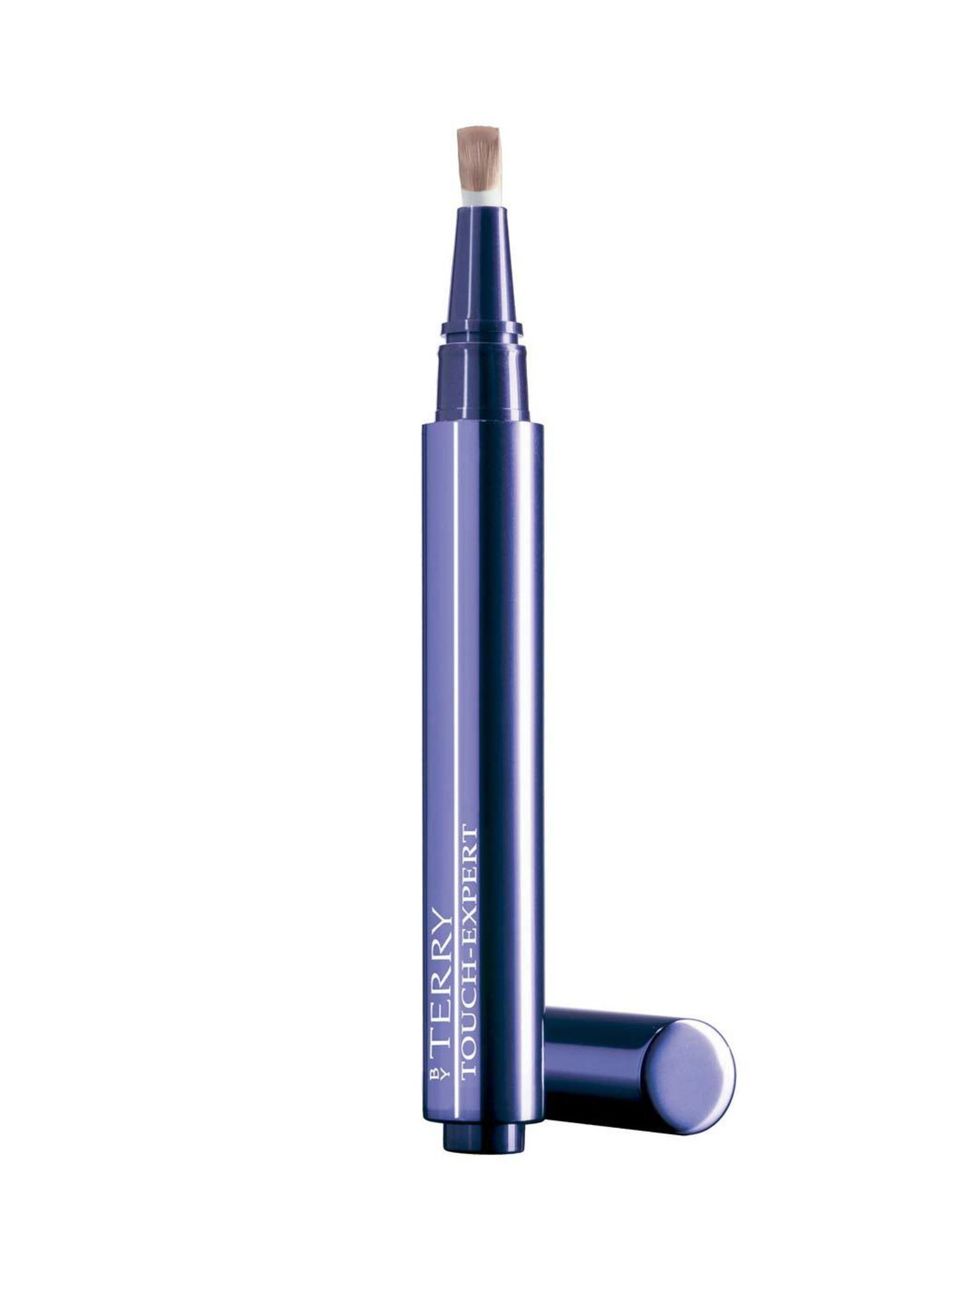 <p>The cover-up</p>

<p><a href="http://uk.spacenk.com/Touch-Expert-Advanced/MUK200005845,en_GB,pd.html">By Terry Touch-Expert Advanced Multi-Corrective Concealer Brush</a>, £28.50.</p>

<p>This highlighting concealer is ultra-light, never cakes, covers e